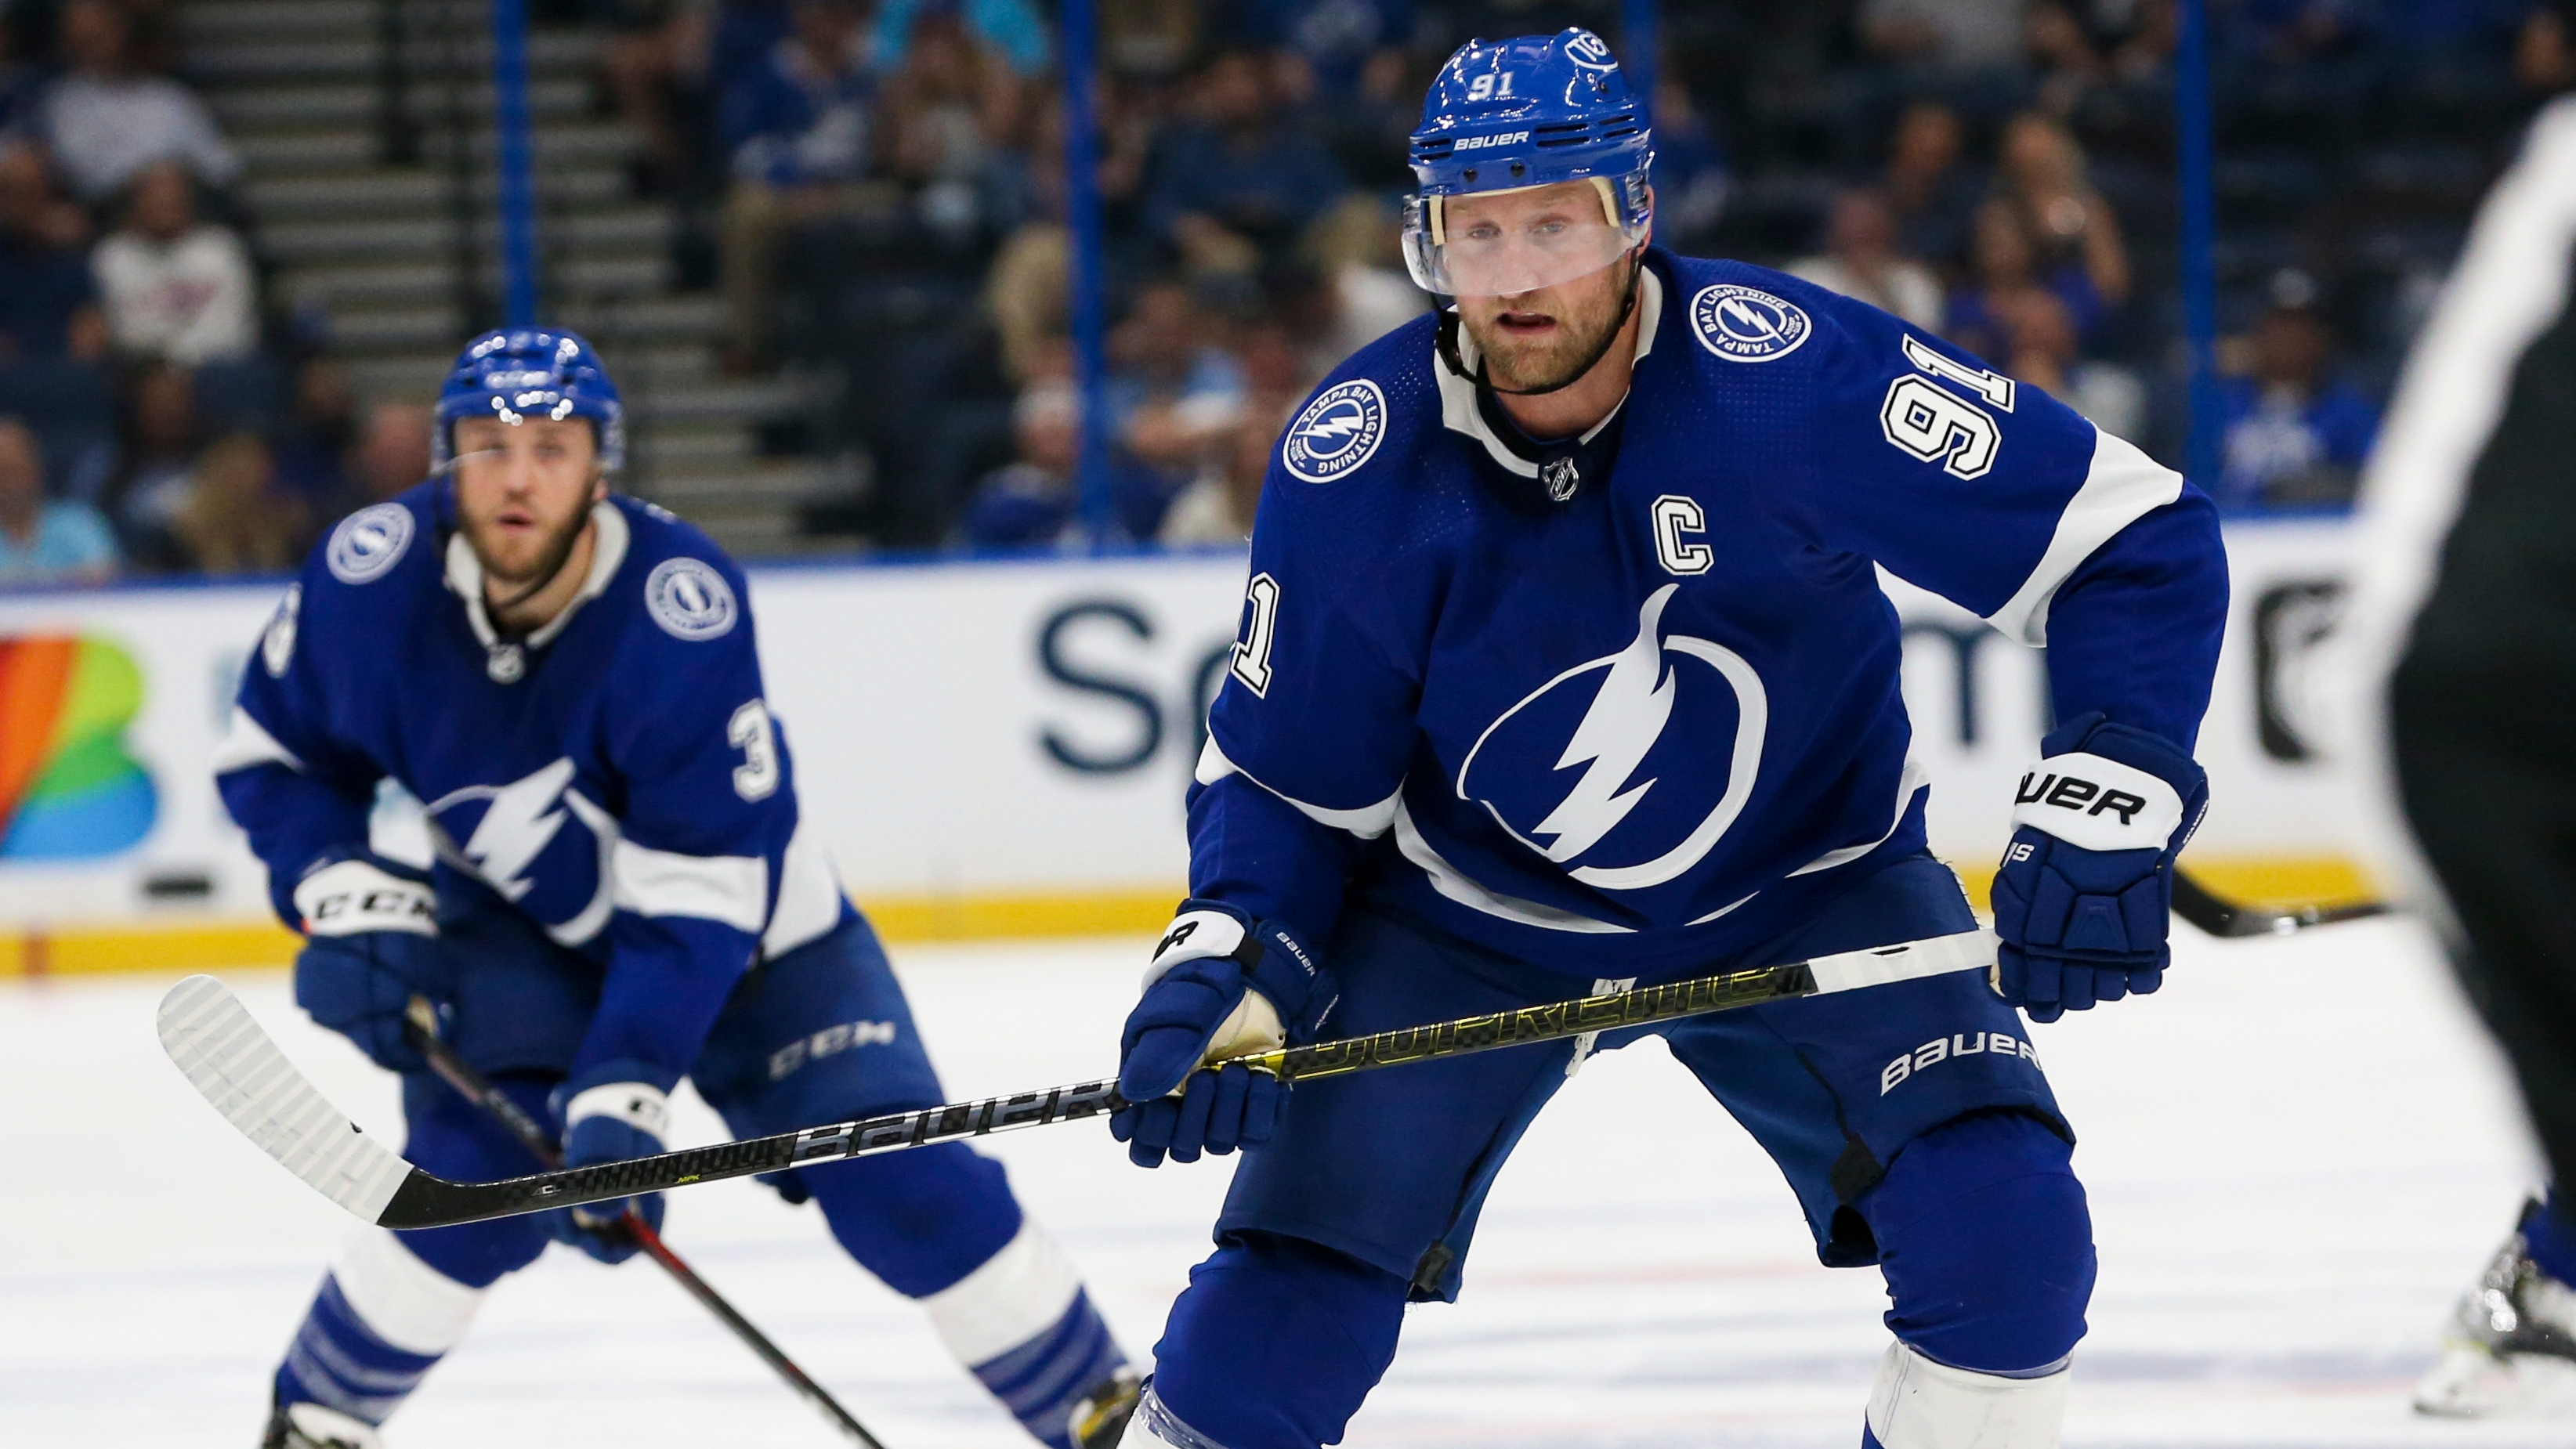 Lightning captain Steven Stamkos feels ready to return after blood-clot  surgery but doctors keep him sidelined